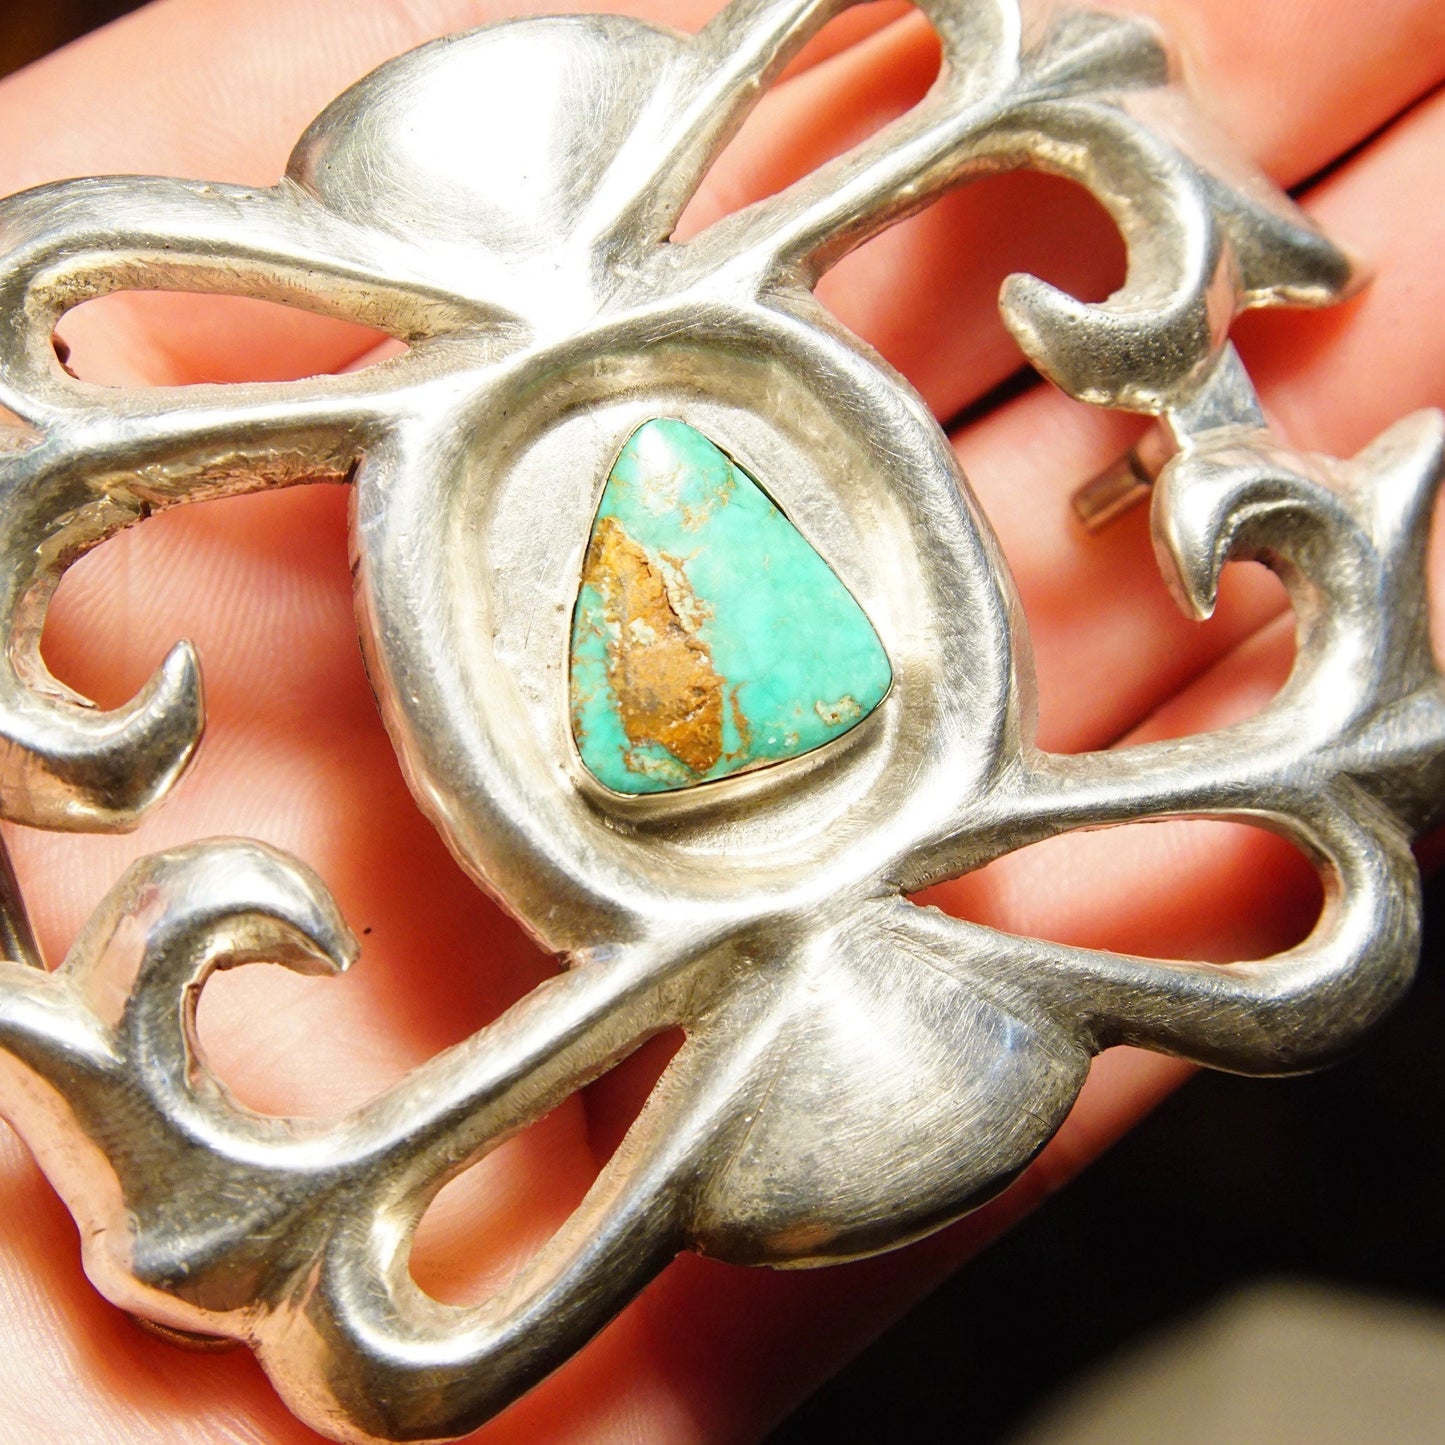 Vintage Native American sterling silver sand cast belt buckle featuring natural turquoise stone, signed "Phillip", measuring 3 1/8 inches wide, showcasing intricate craftsmanship and artisan design.